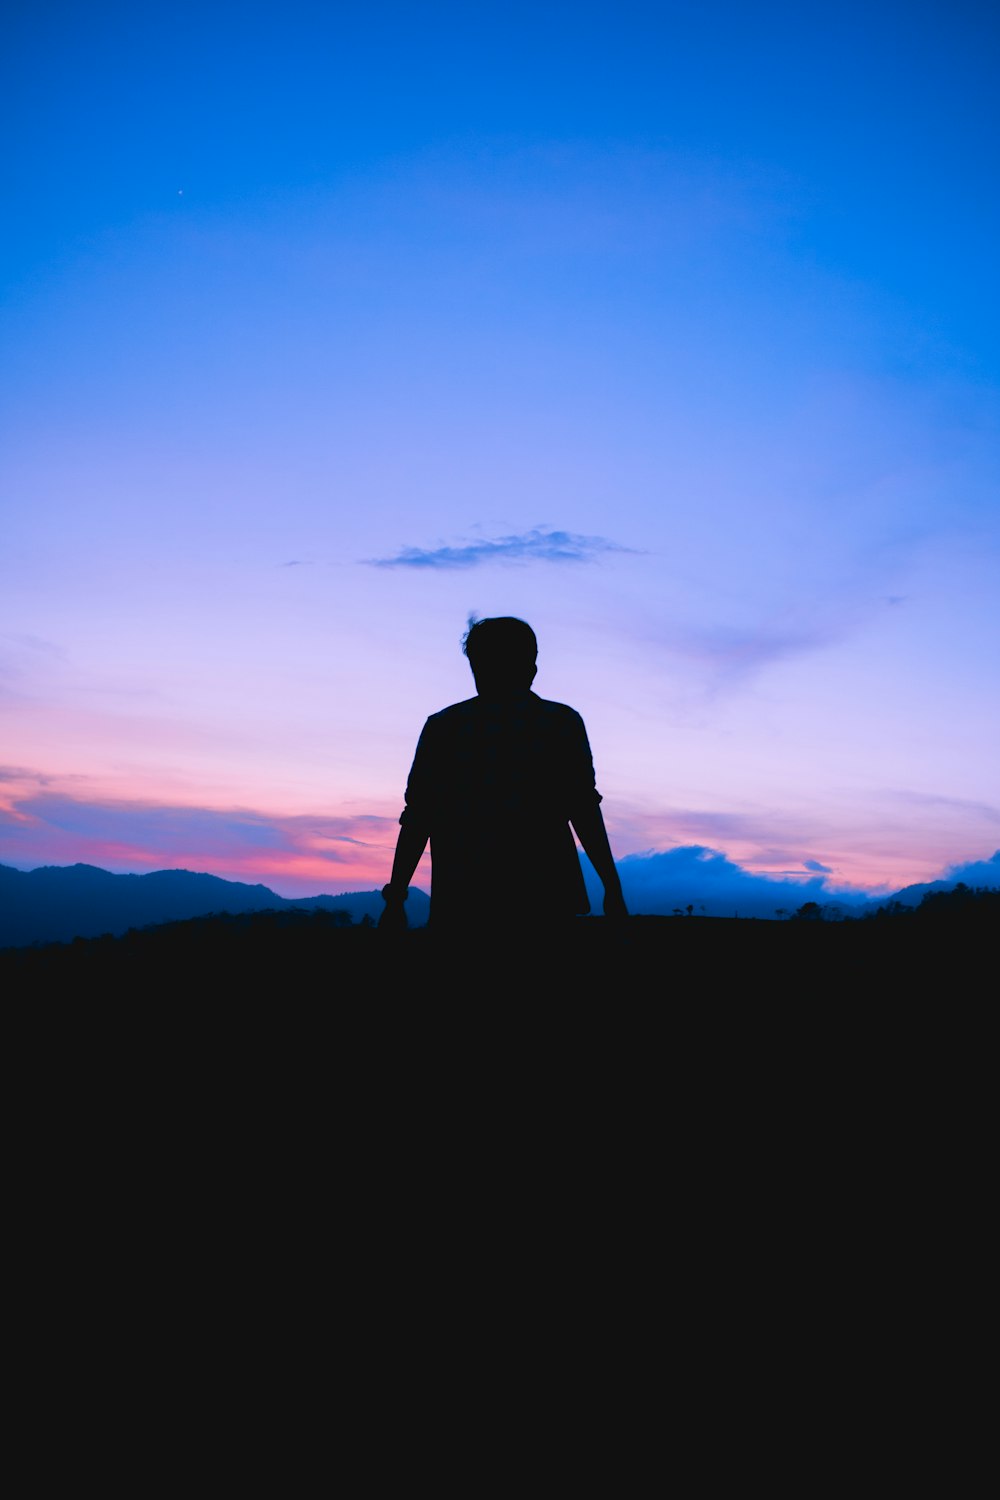 500+ Silhouette Pictures [HD]  Download Free Images on Unsplash